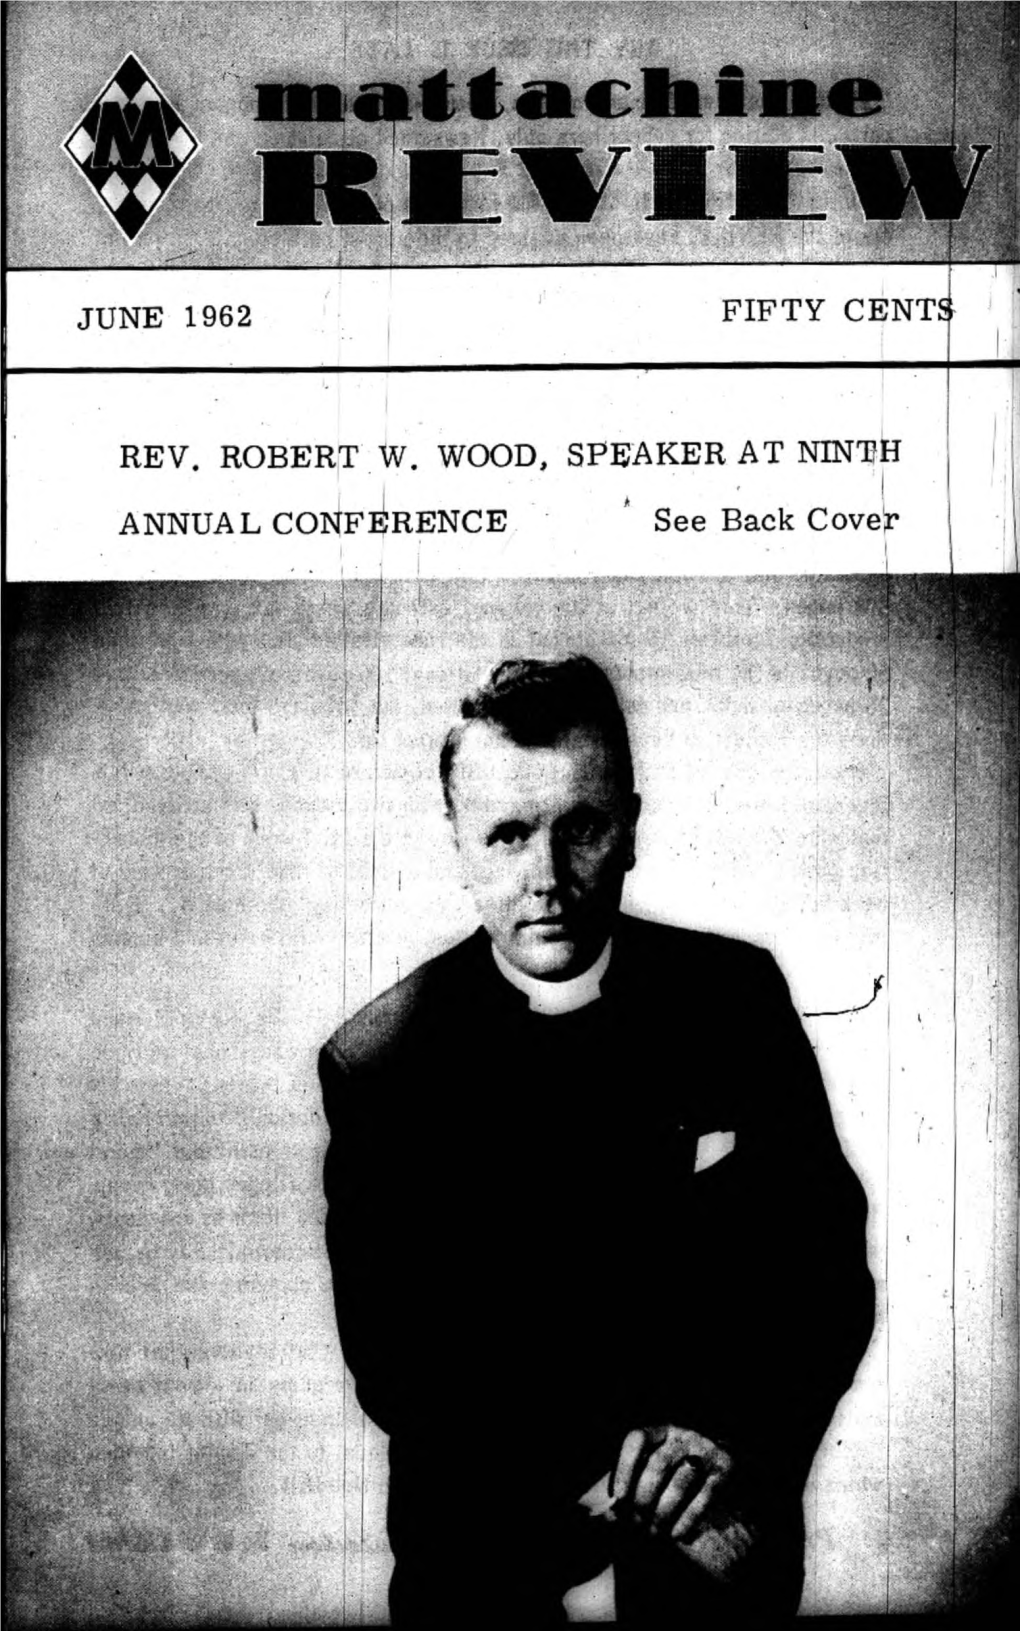 June 1962 Fifty Cents Rev. Robert W. Wood, Speaker At